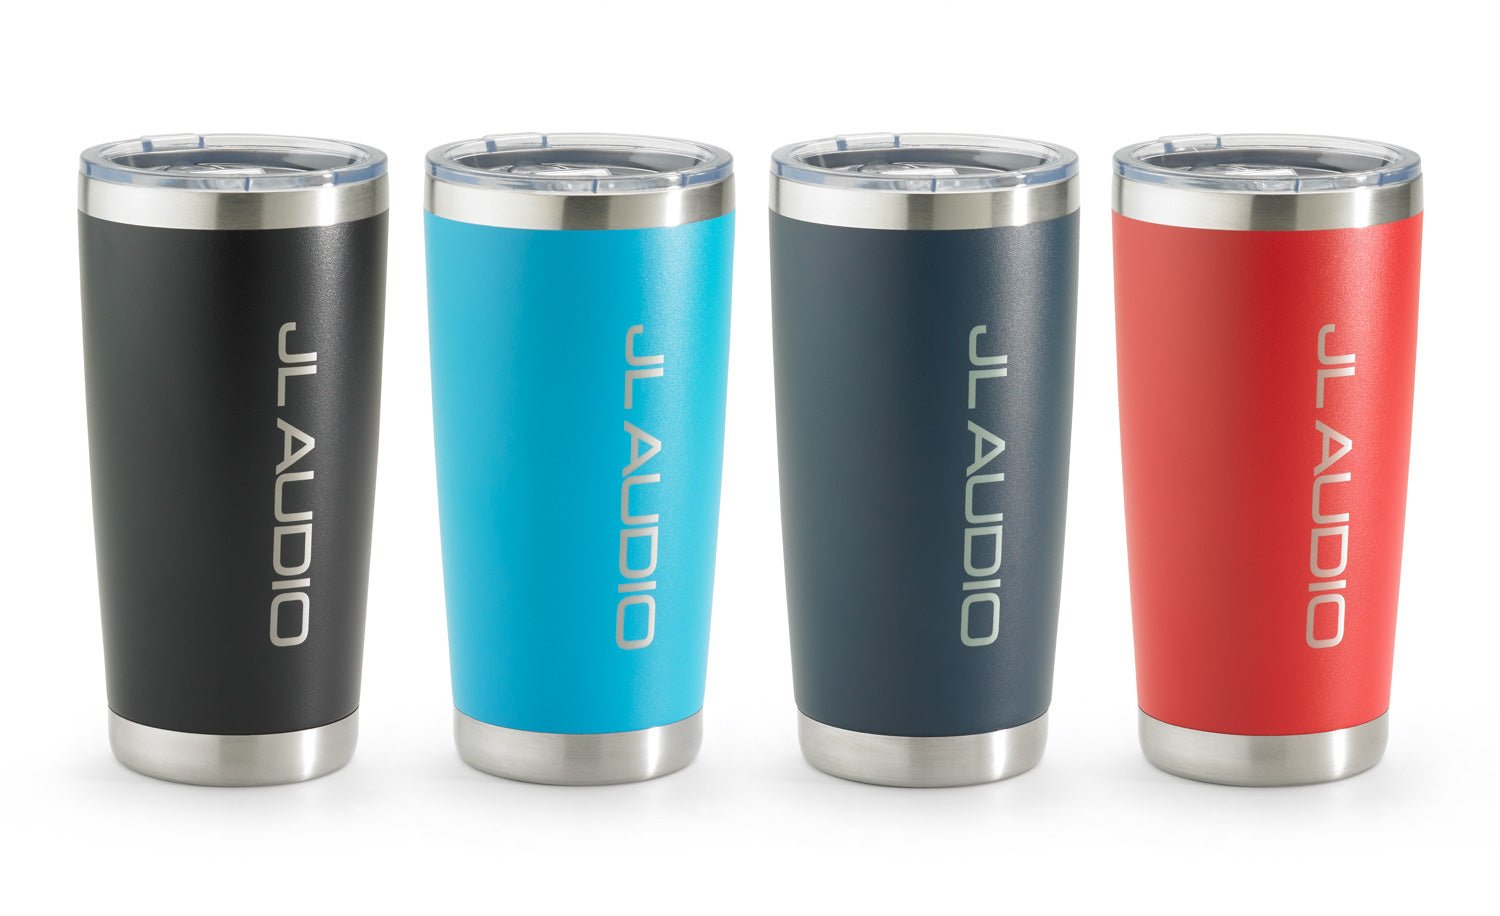 Black, Bright Blue, Navy and Red Tumblers with lids and JL Audio logo